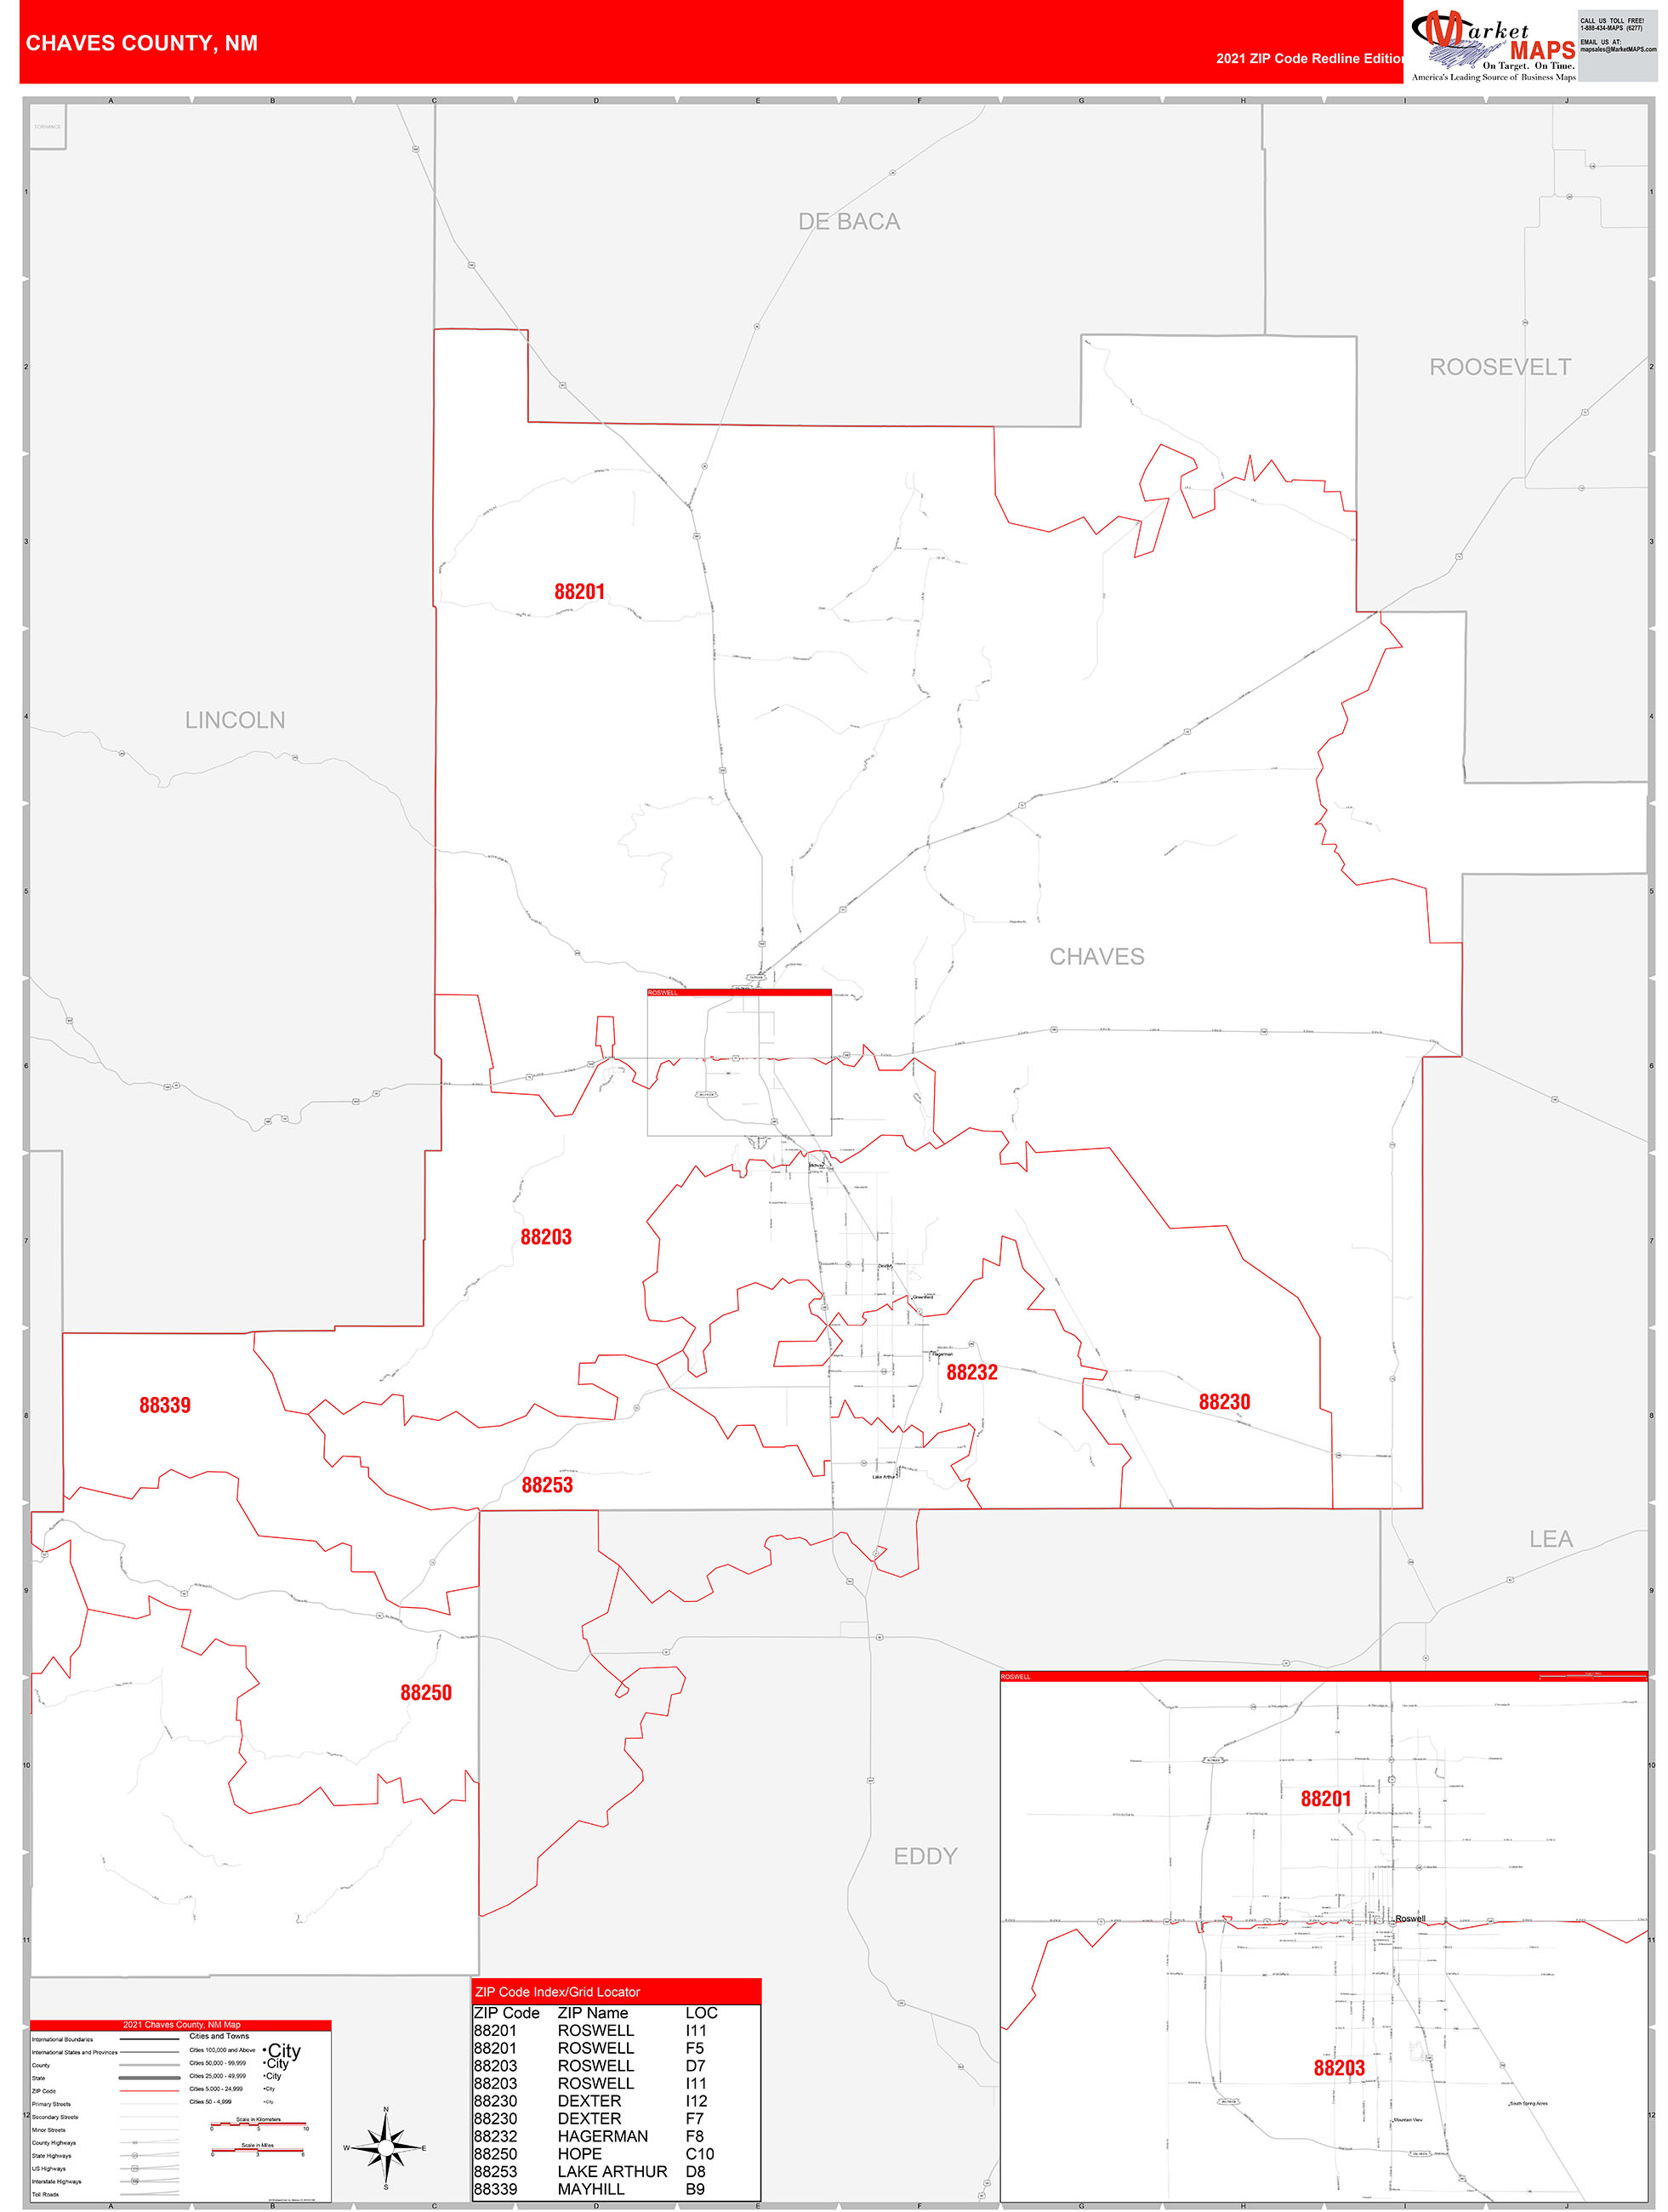 Chaves County NM Zip Code Wall Map Red Line Style by MarketMAPS